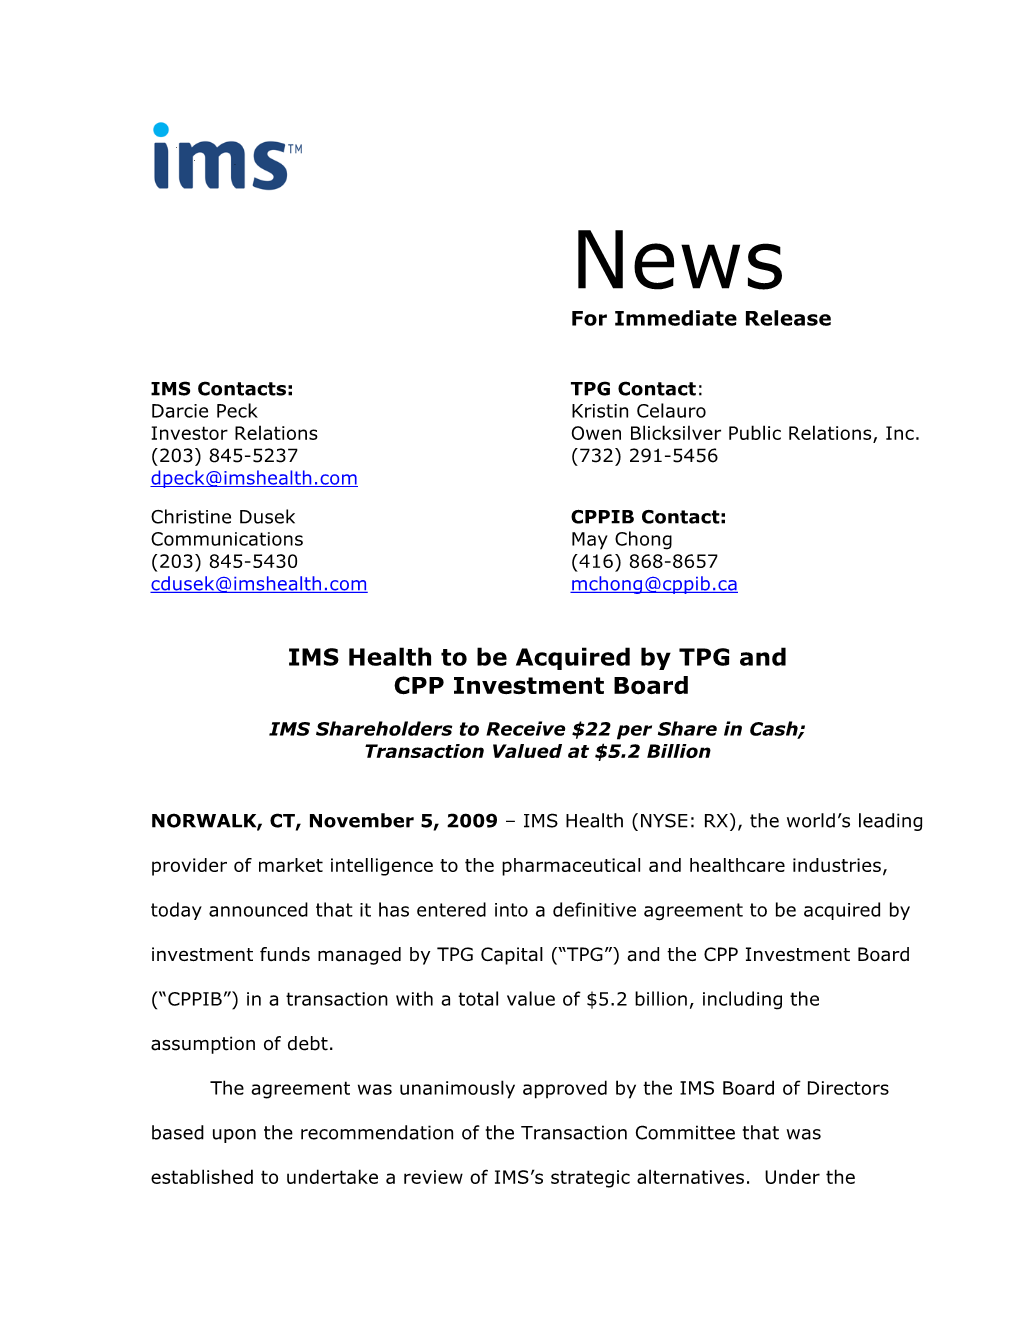 IMS Health to Be Acquired by TPG and CPP Investment Board